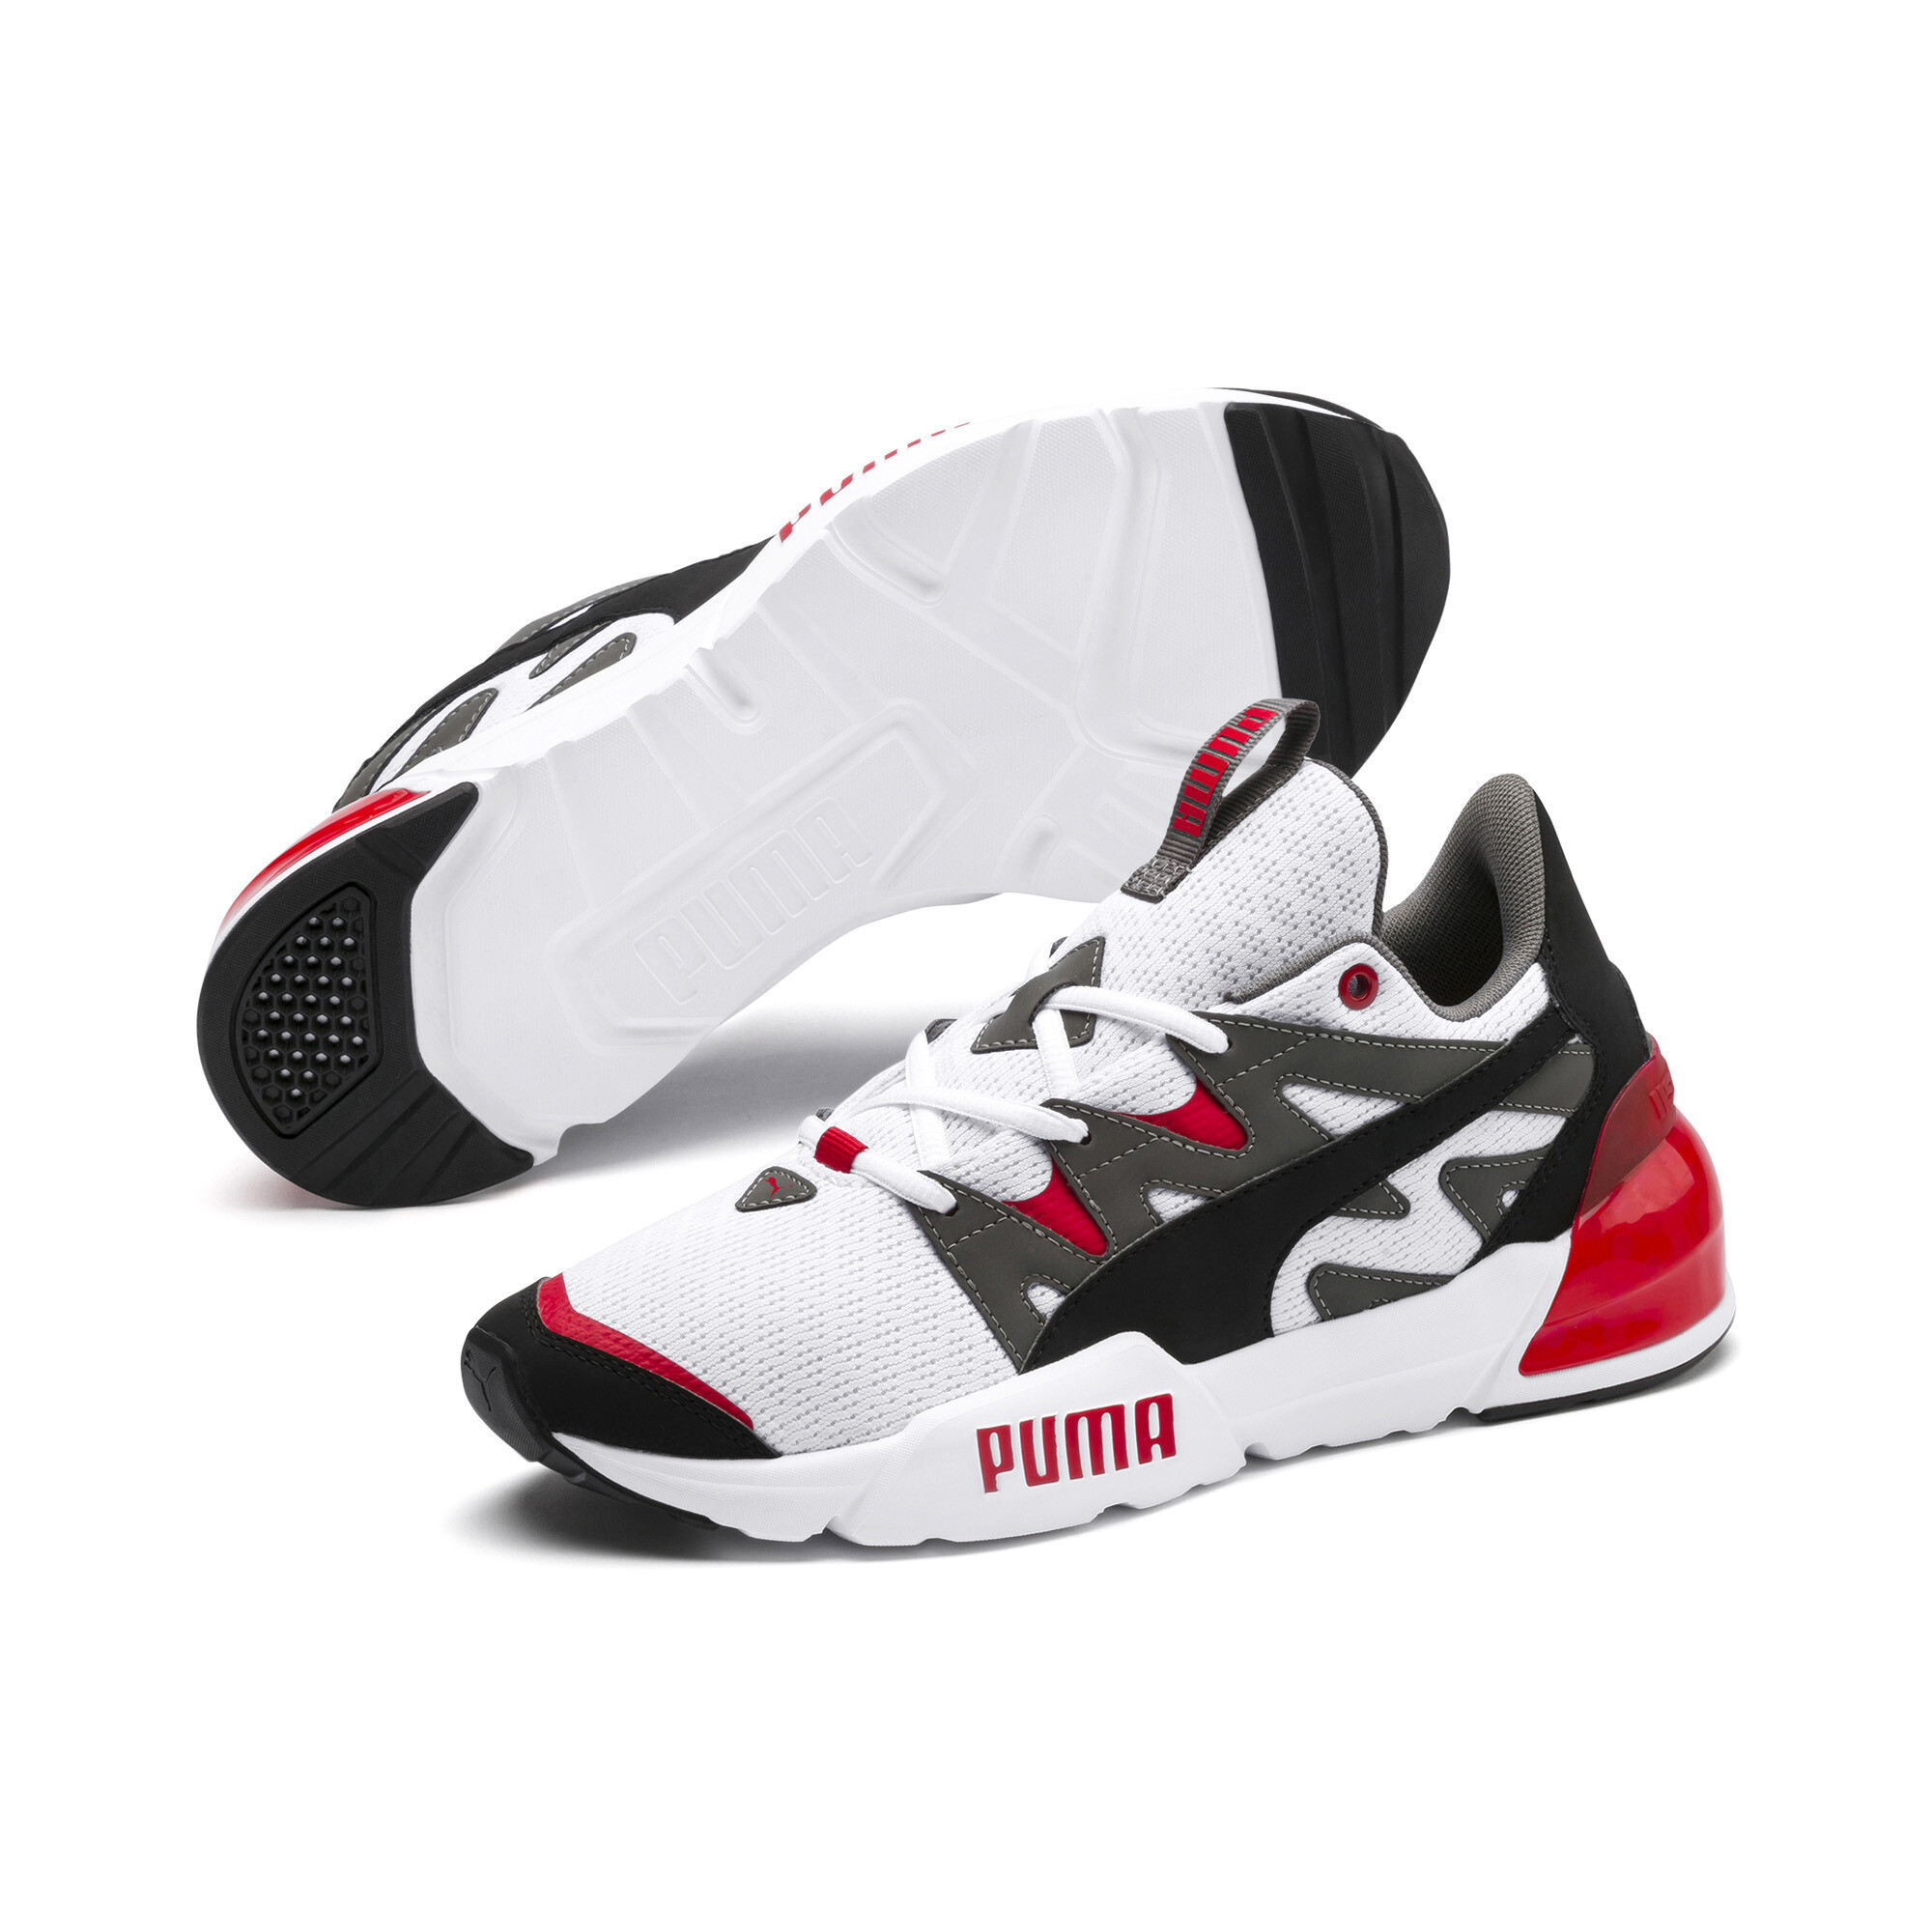 puma cell shoes